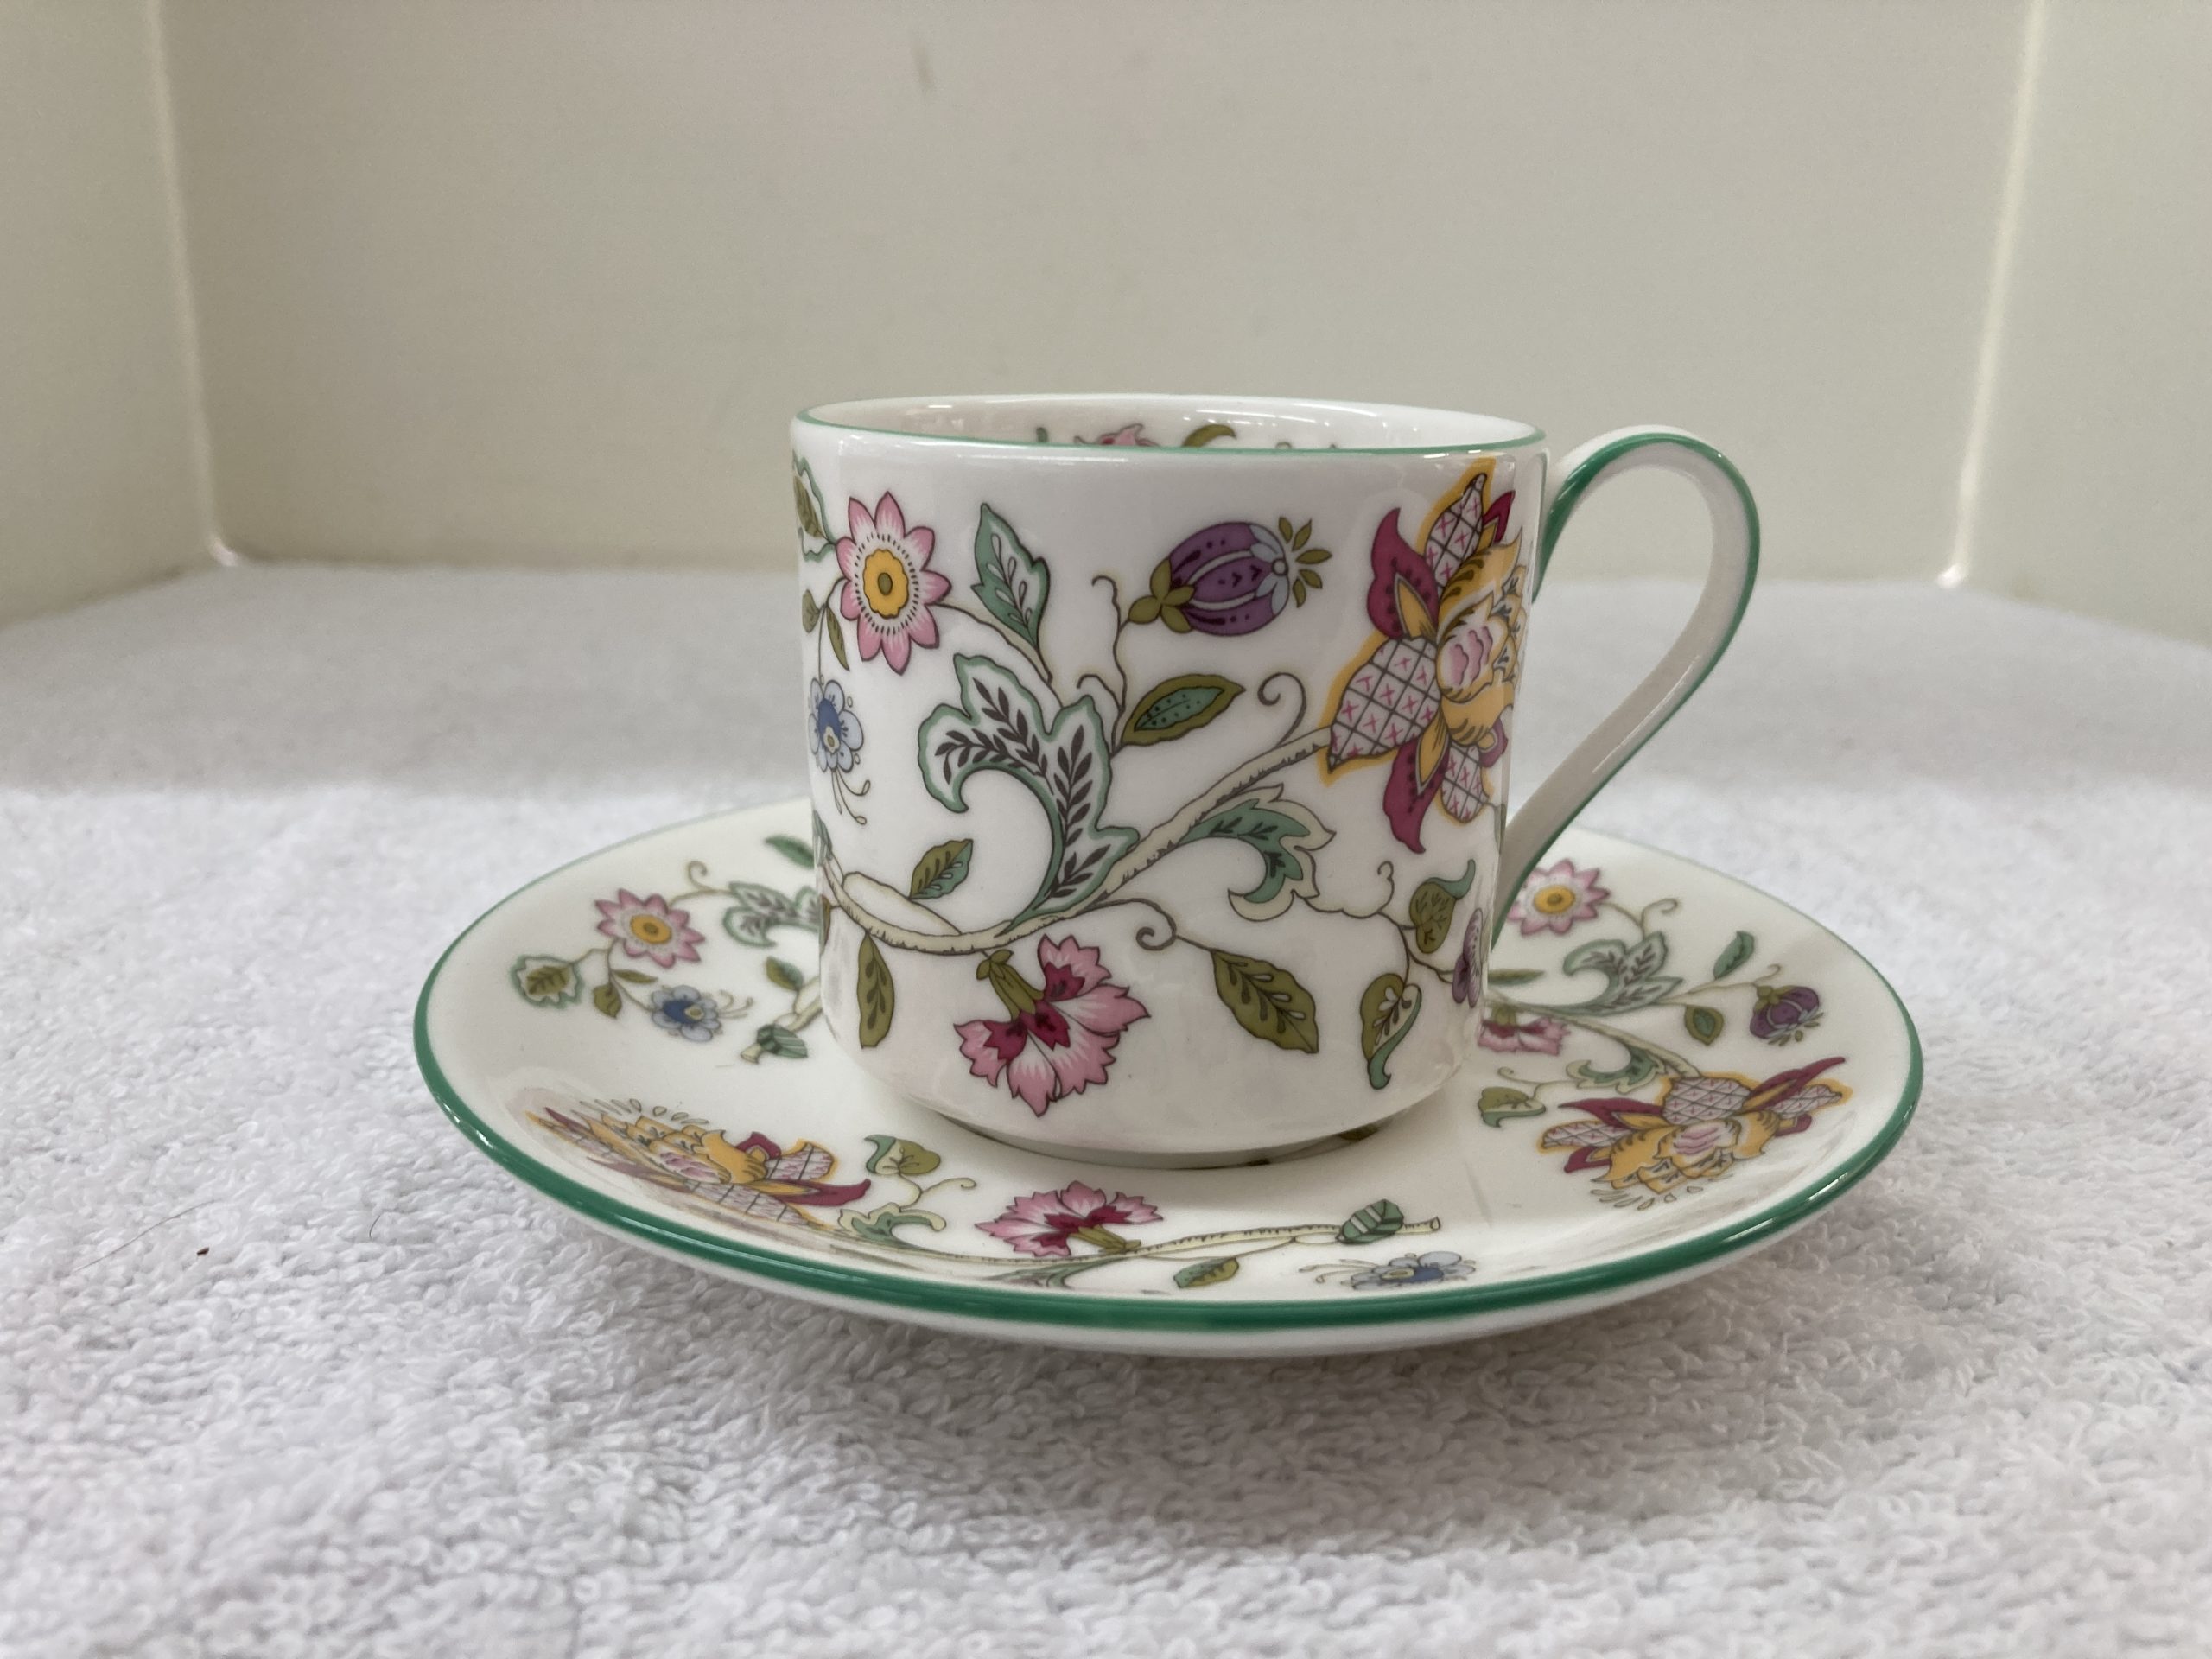 Minton Haddon Hall Demitasse Cup and Saucer made from 1948-2011